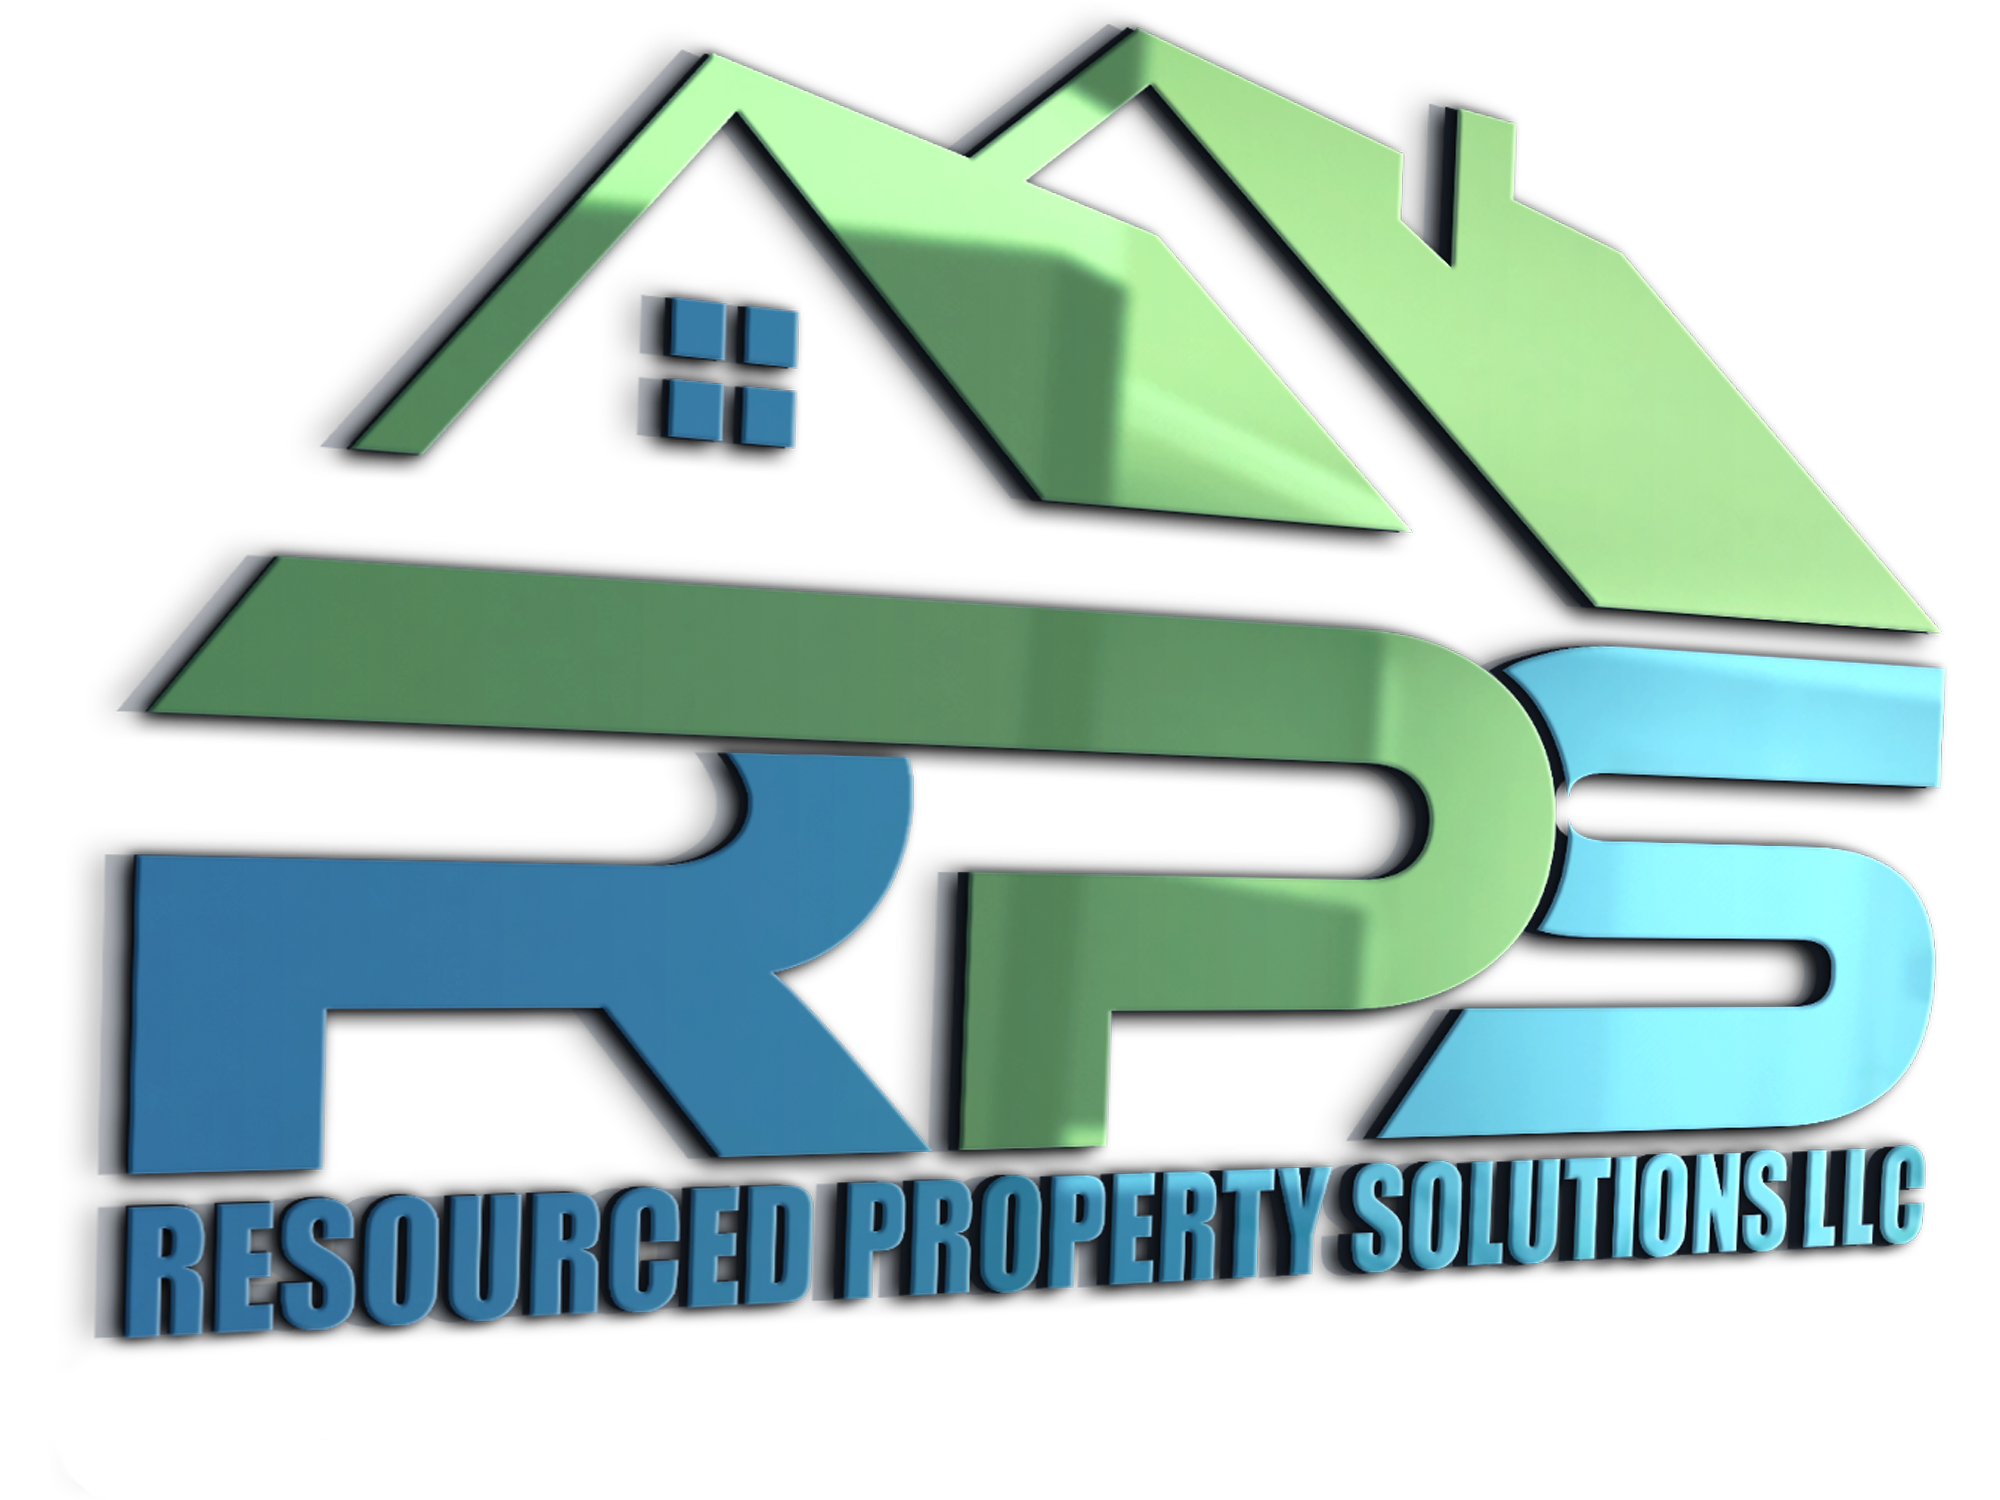 Resourced Property Solutions